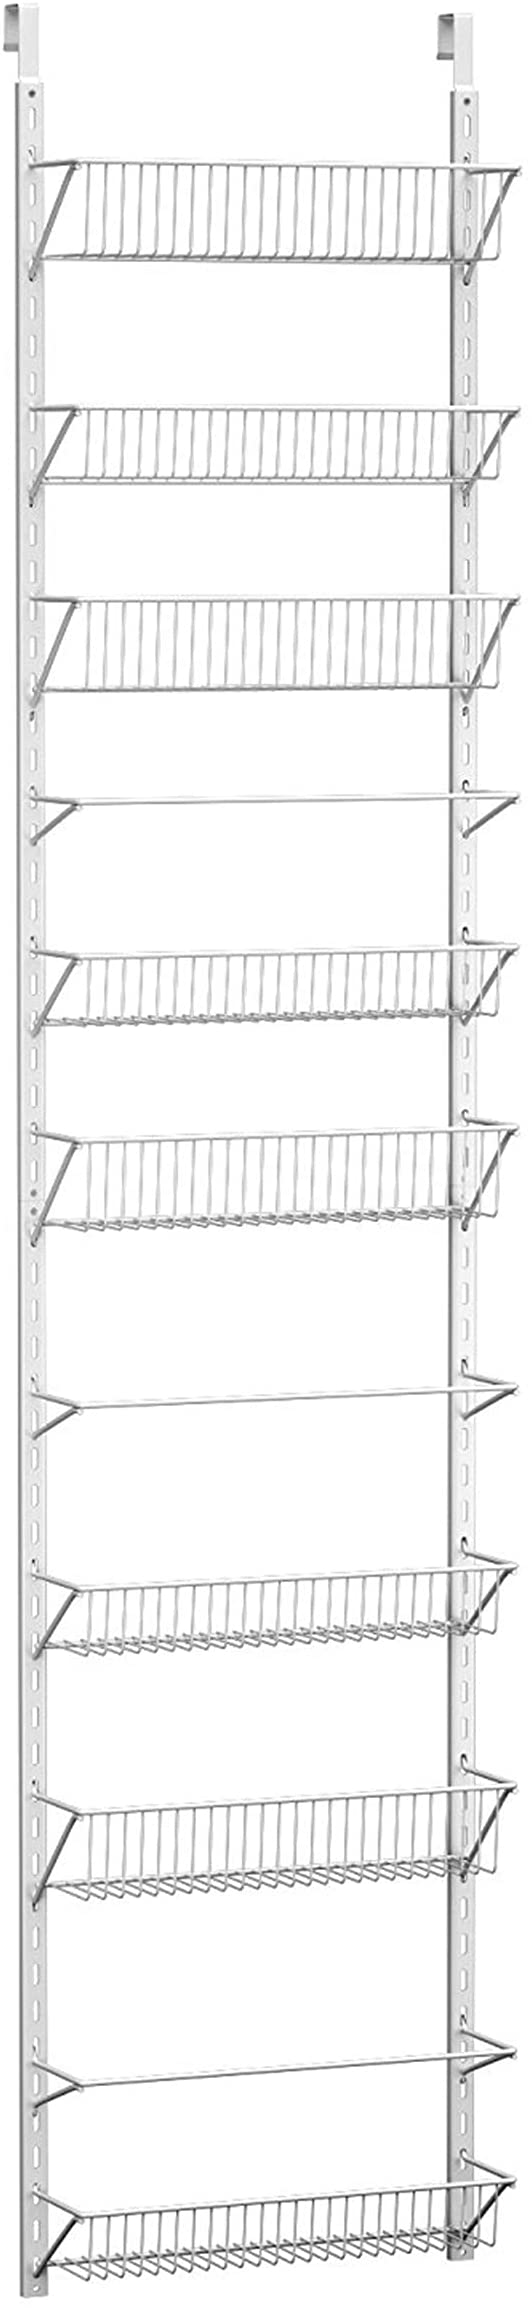 Home-Complete HC-2301 Over The Door Organizer-Space Saving Hanging Storage Shelves, White